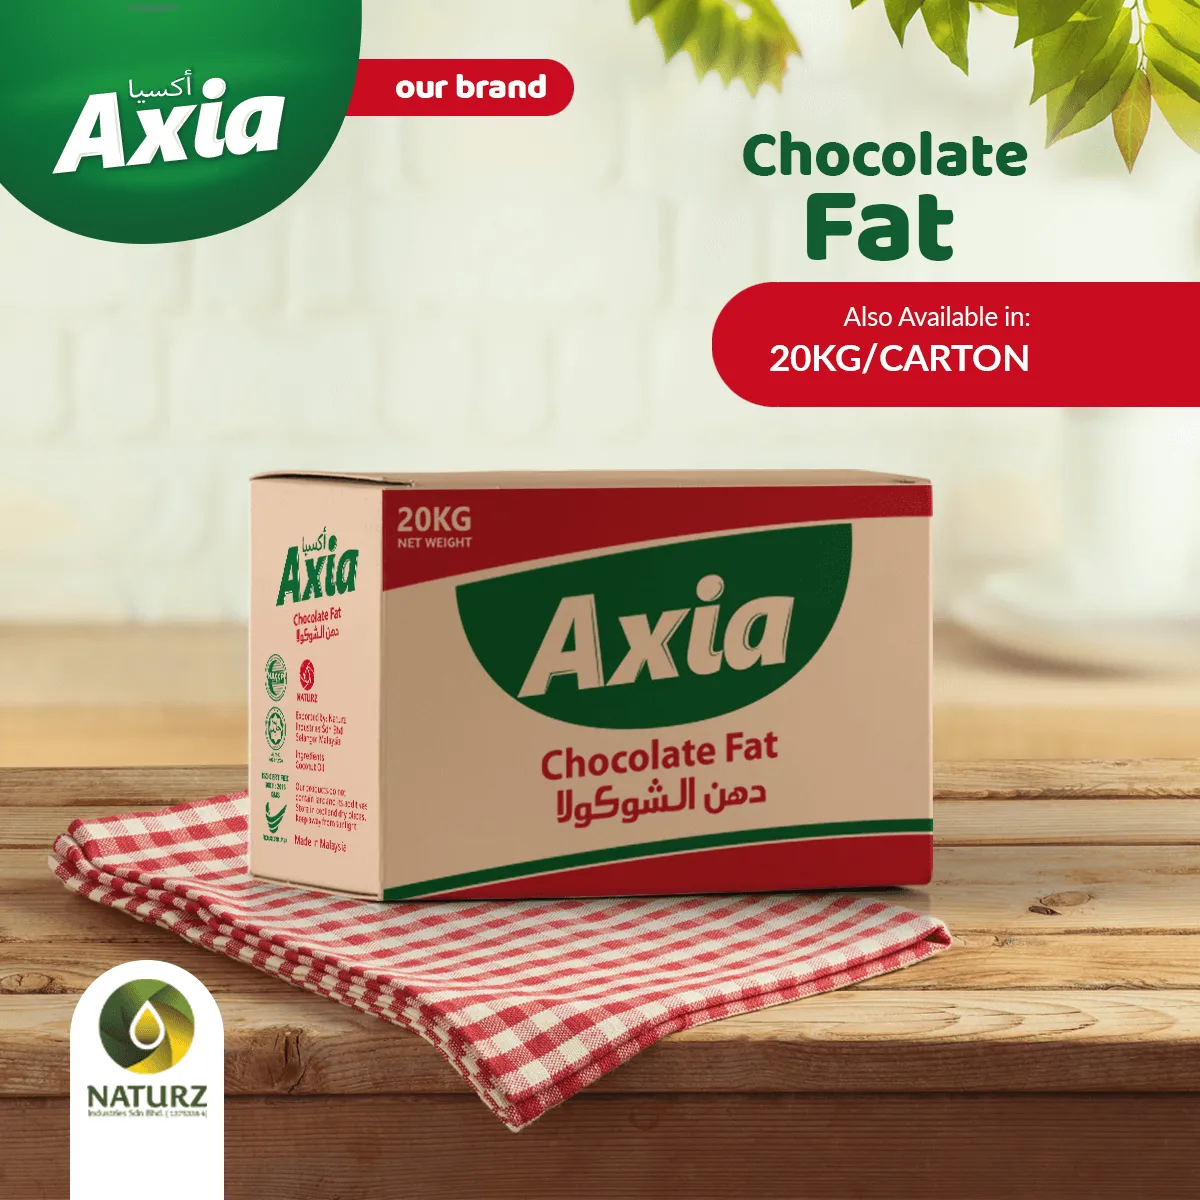 Speciality Fats - Chocolate Fat